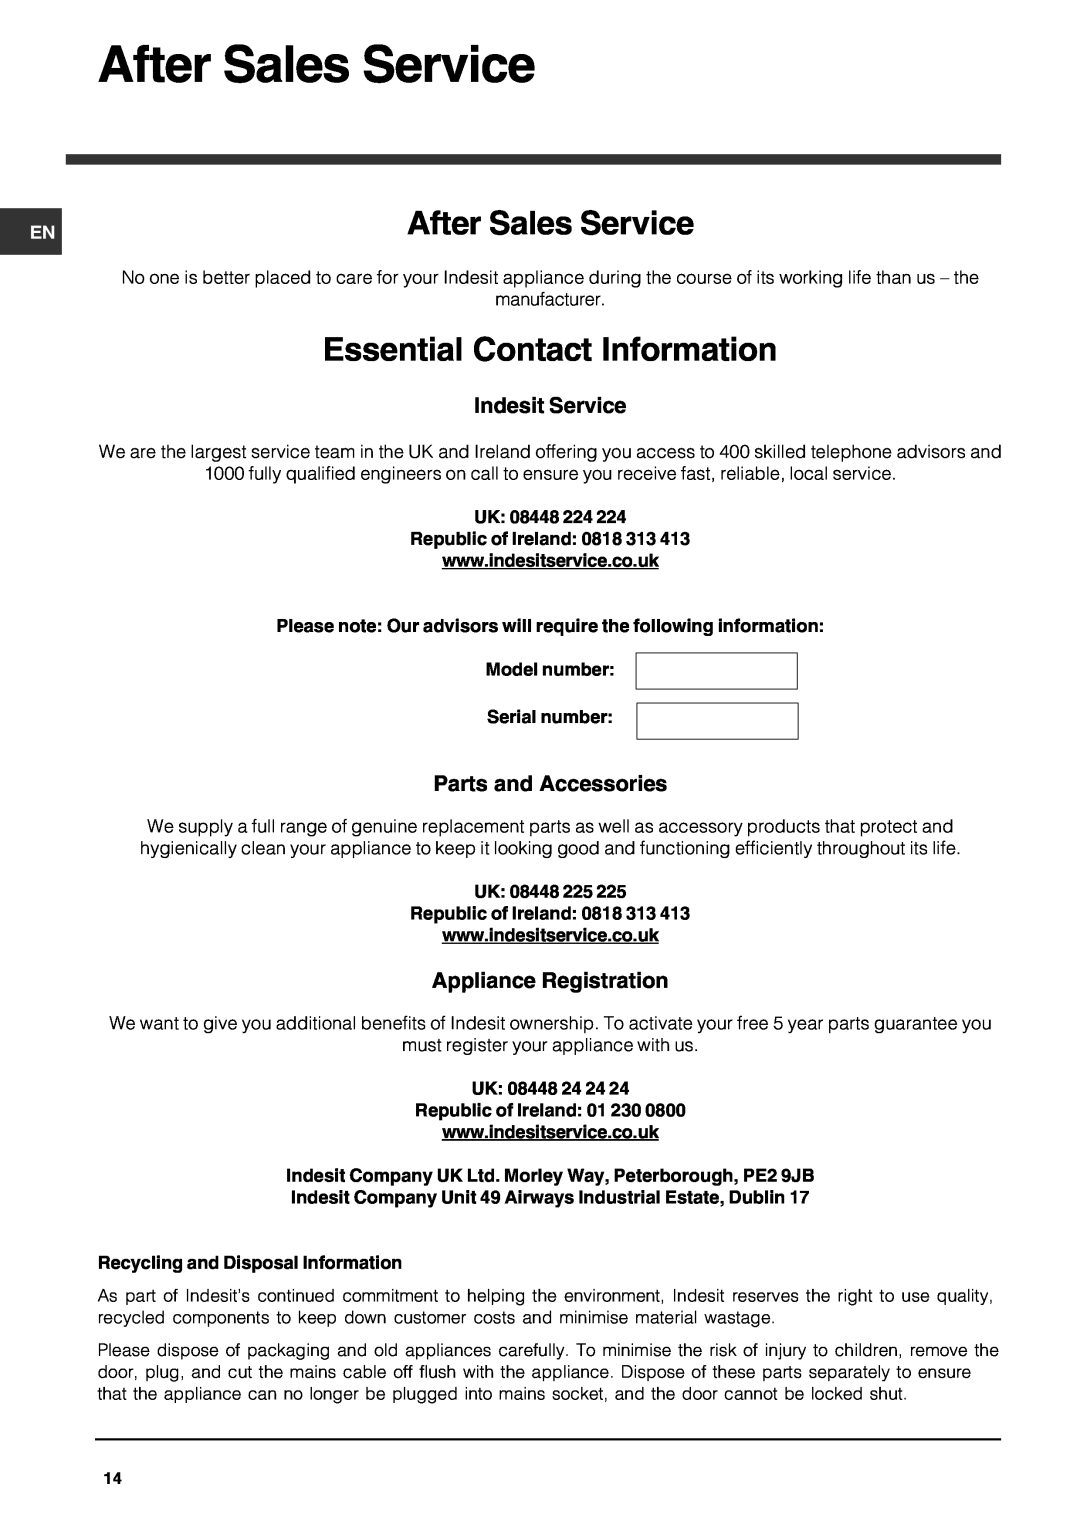 Indesit IDS 105 operating instructions After Sales Service, Essential Contact Information 